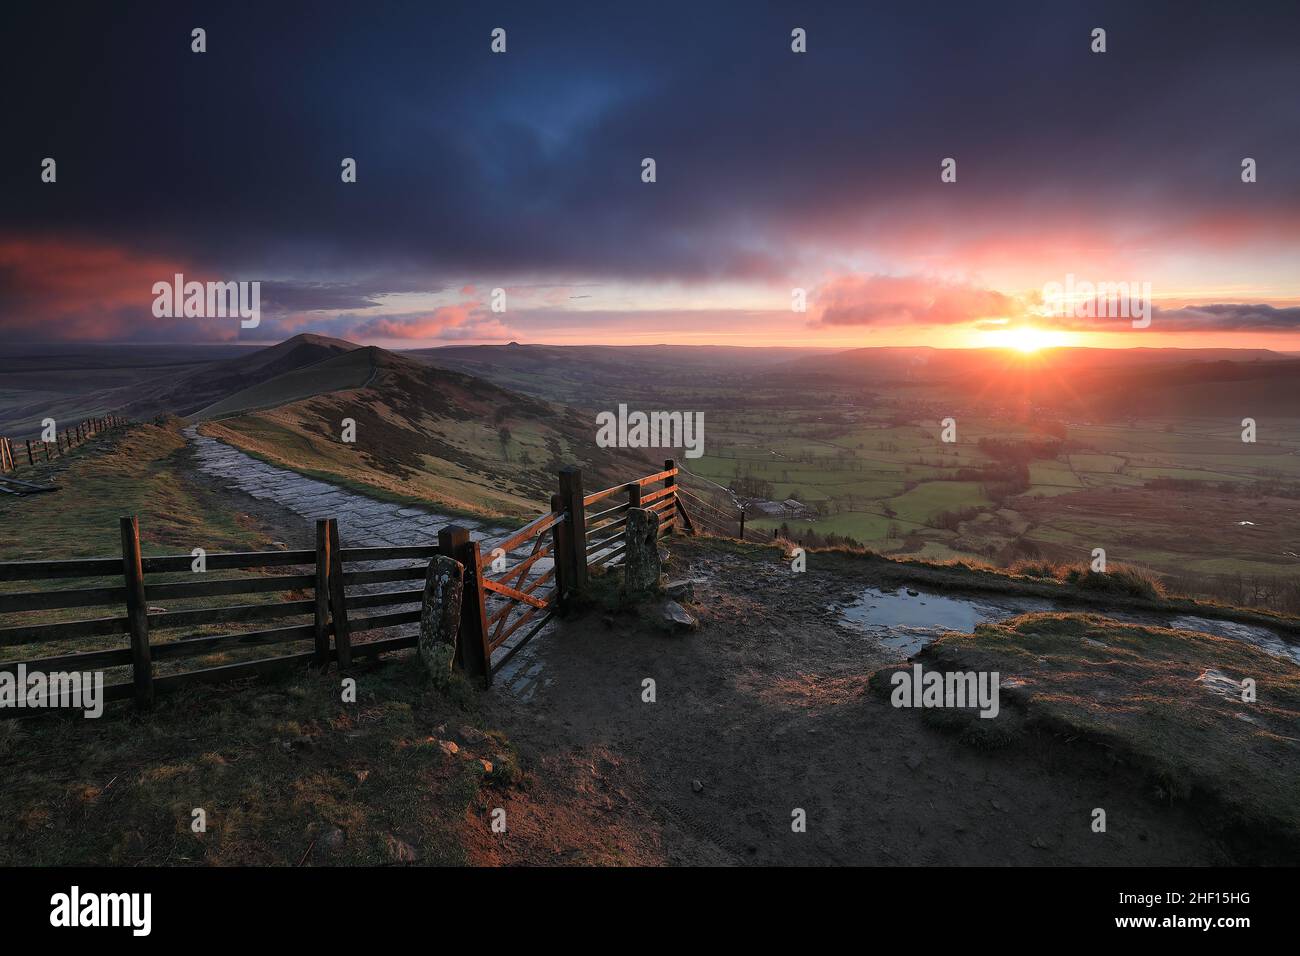 Mam Tor, in the High Peak area of thePeak District National Park, UK Stock Photo